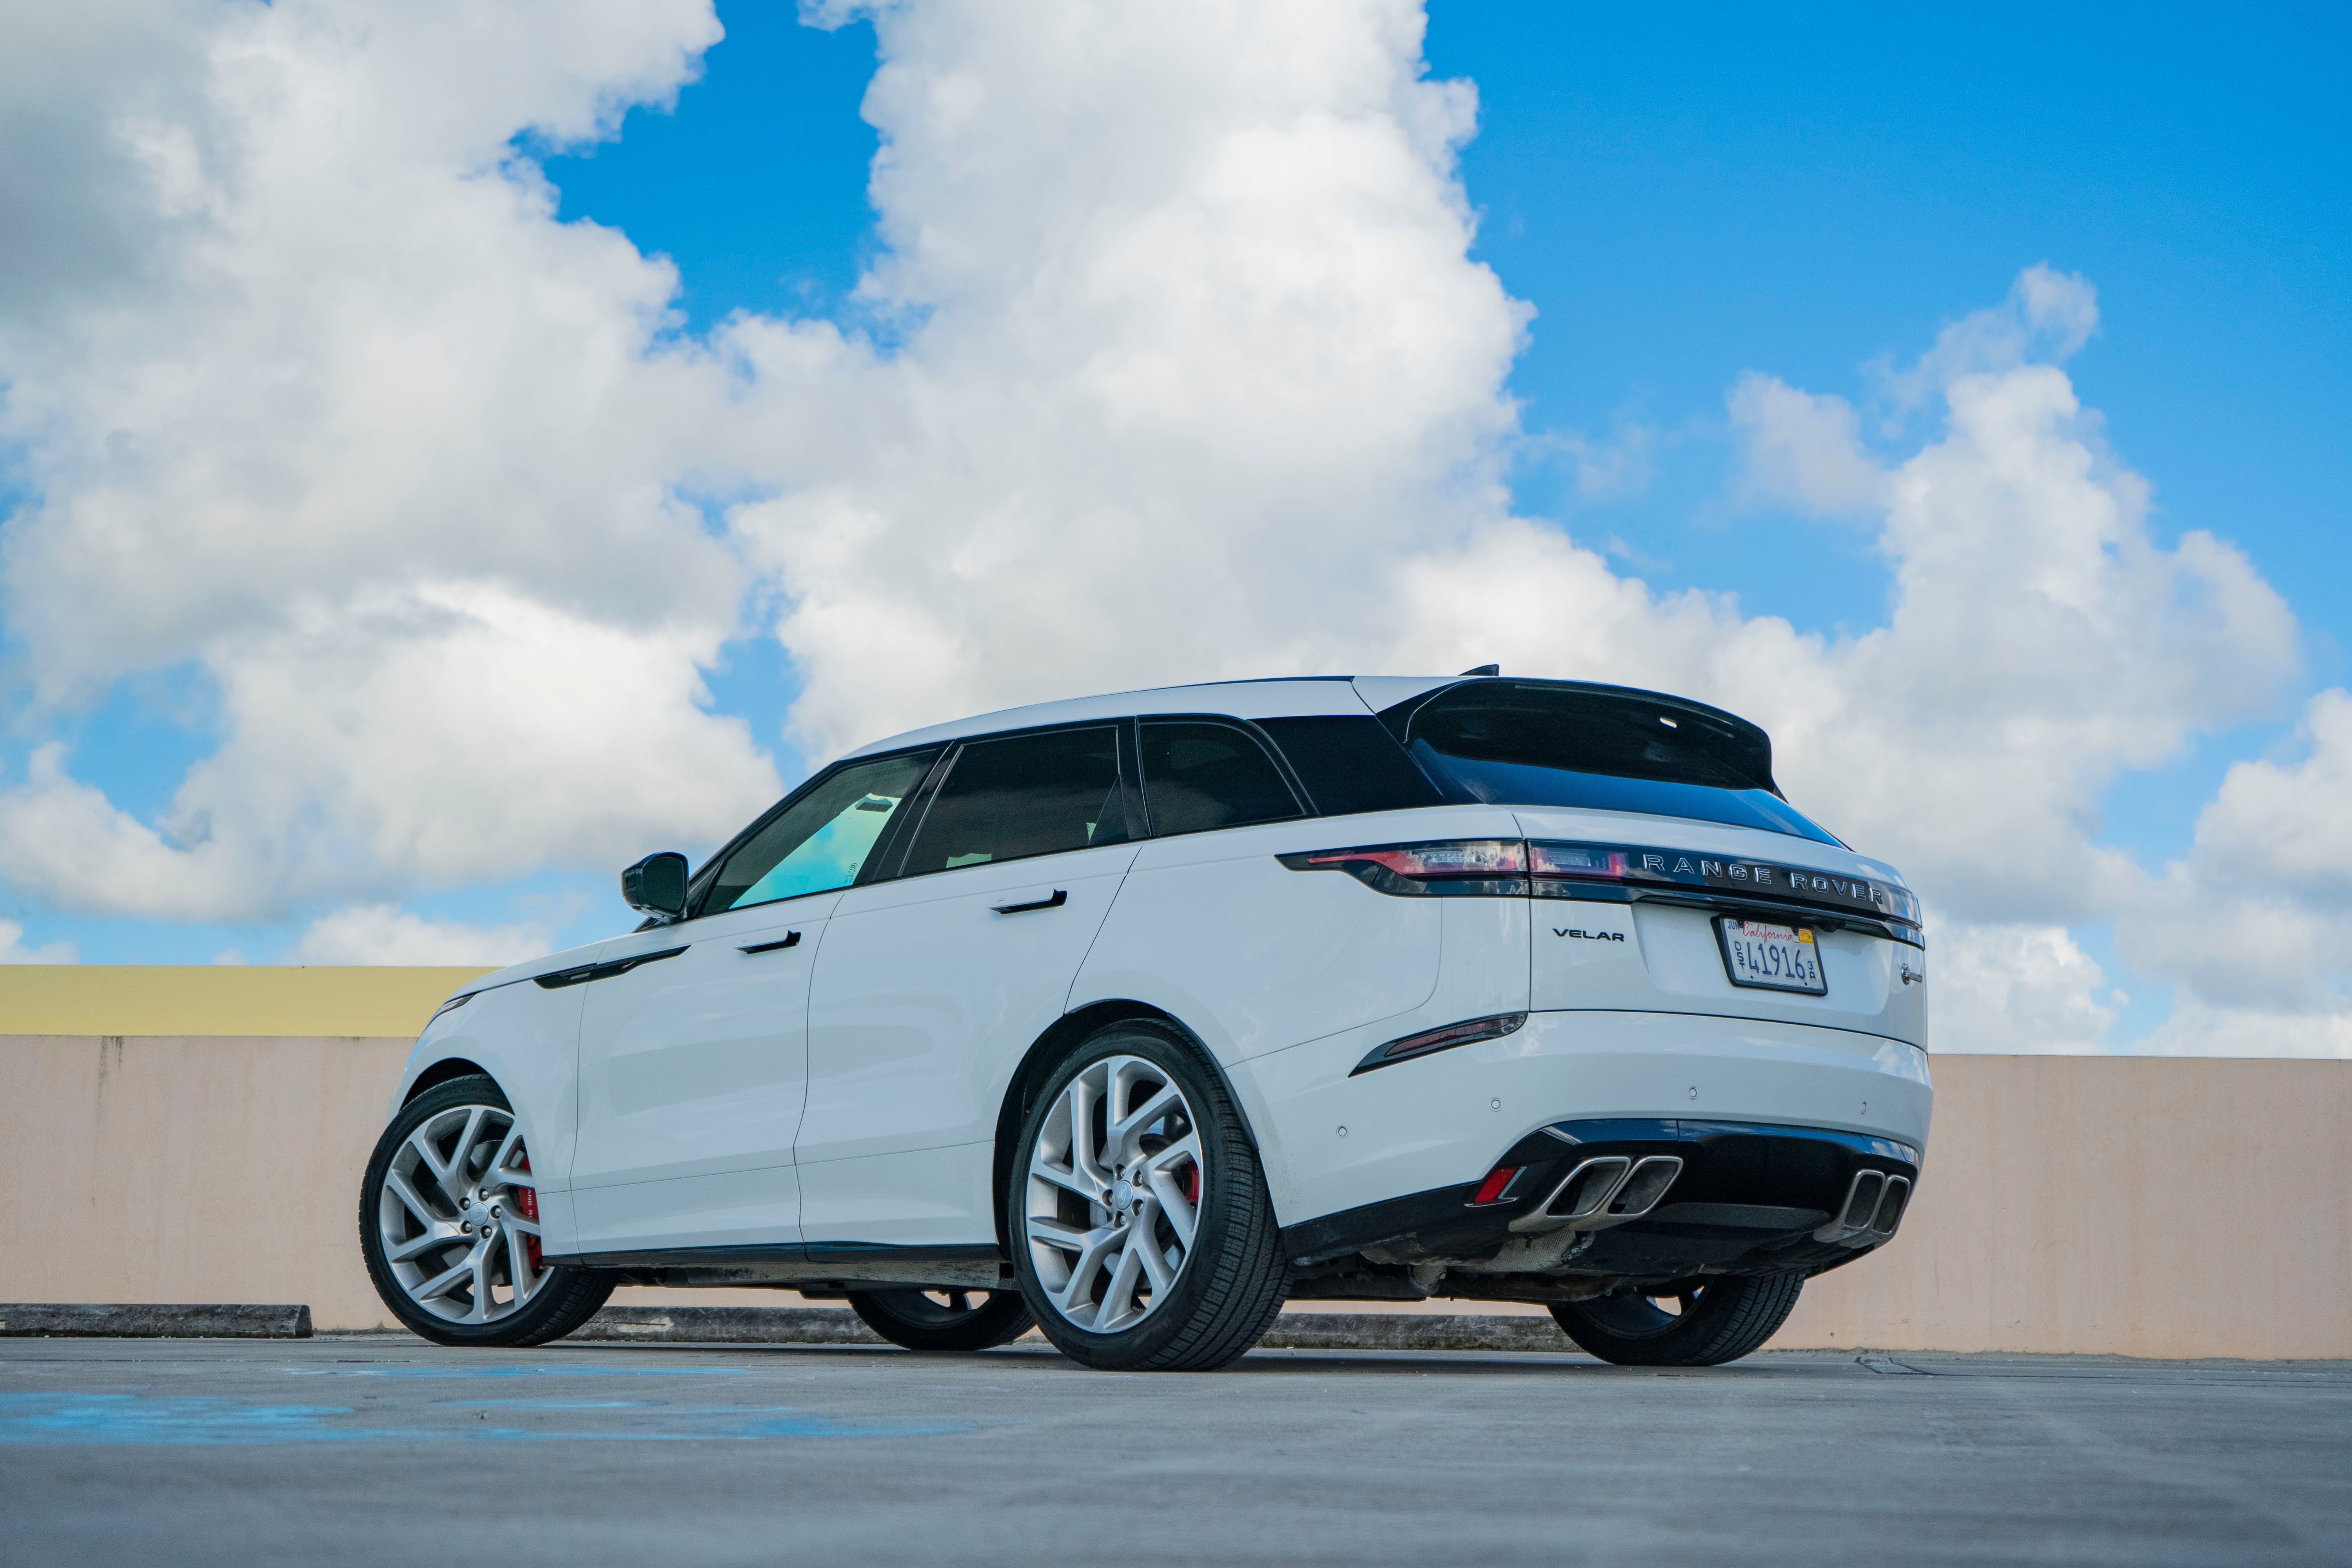 2022 - 2022 Test Drive: The Range Rover Velar Is Painfully Under-Appreciated 